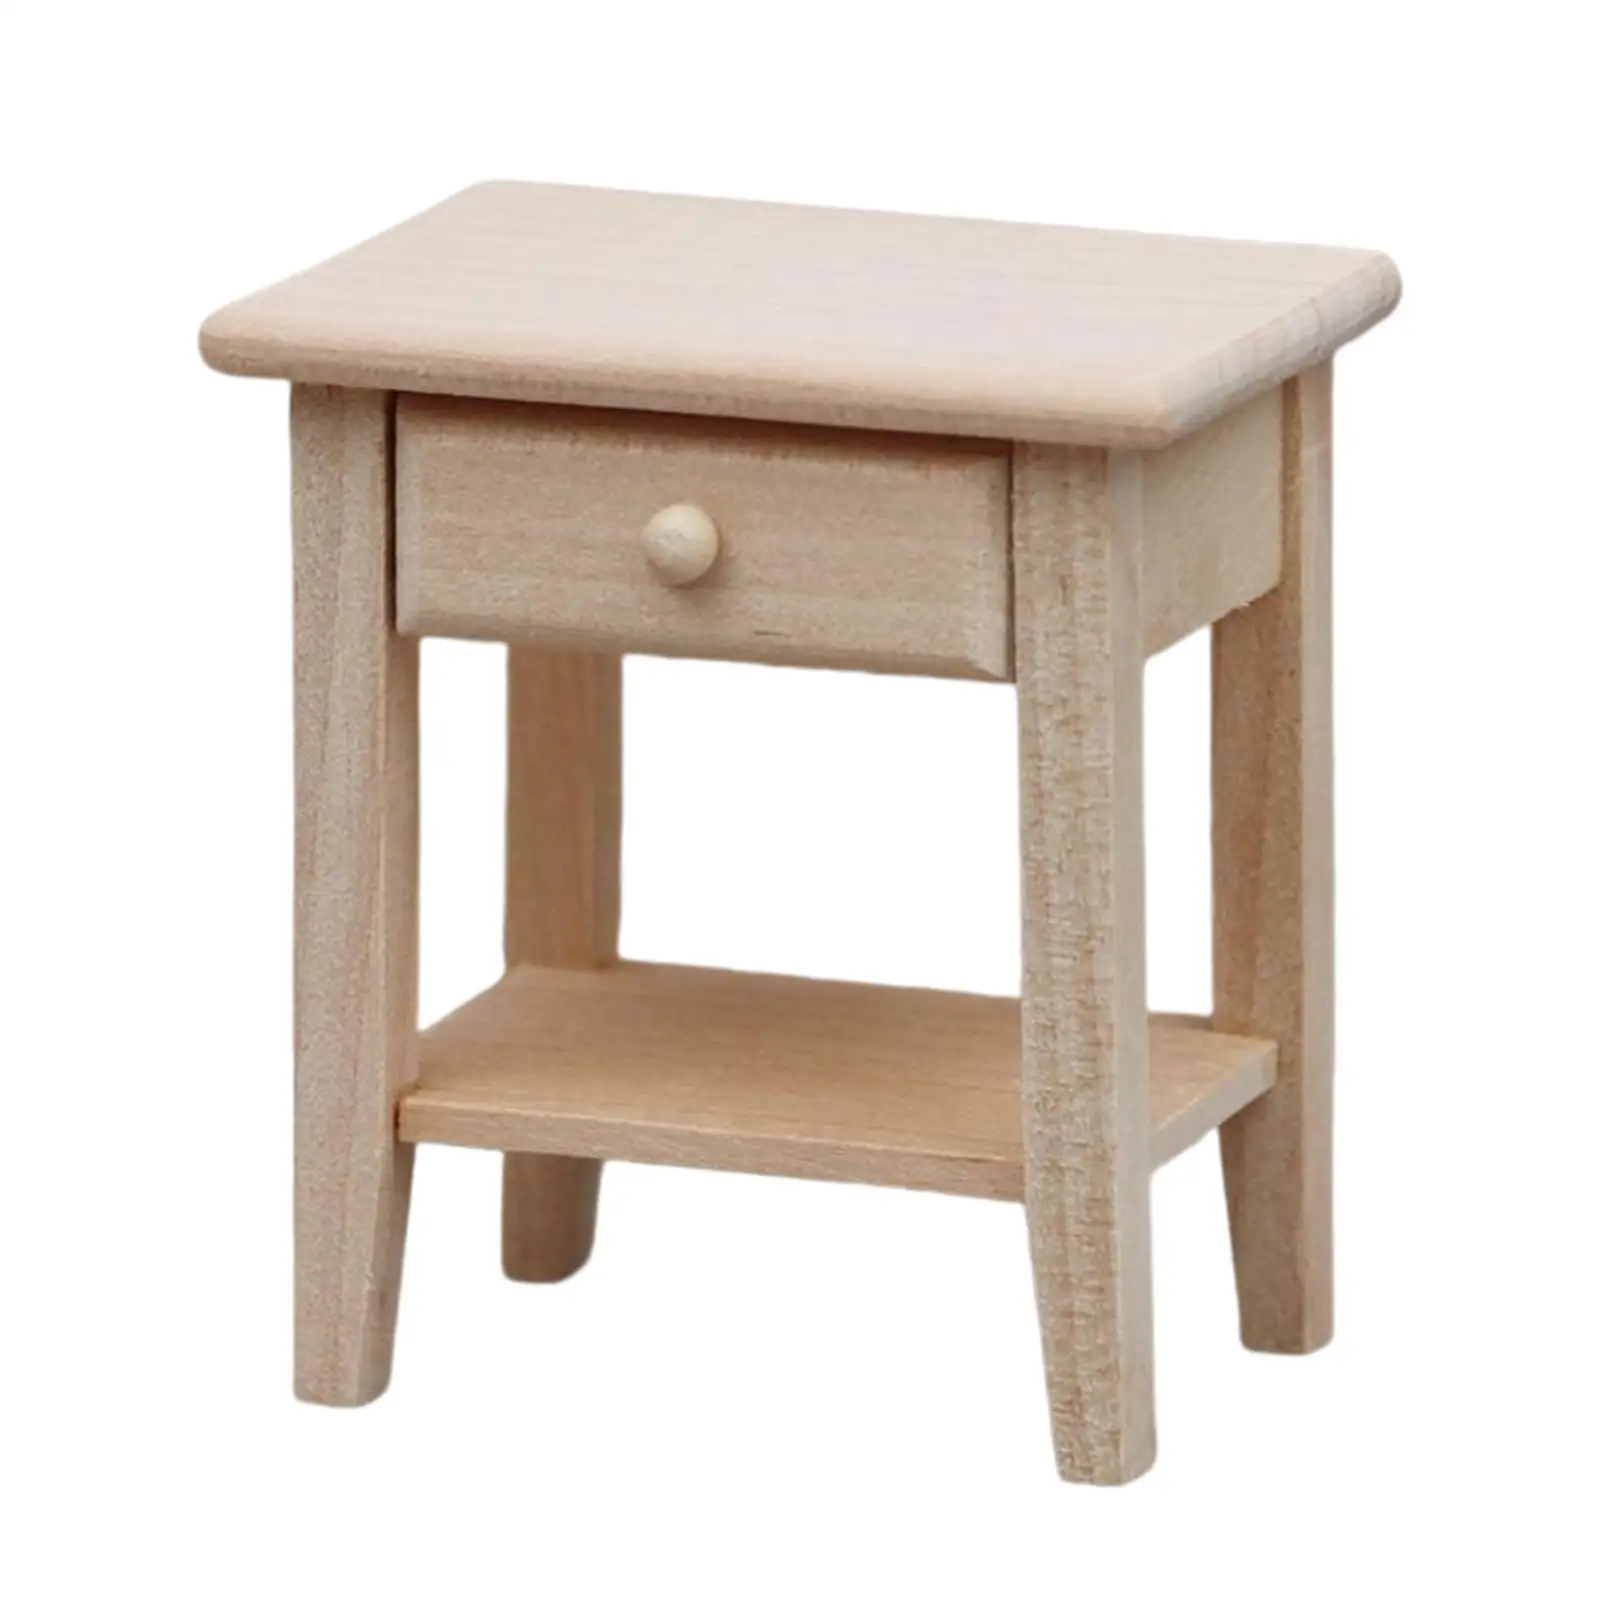 1/12 Scale Dollhouse Night Stands with Drawer Handcraft Miniature Furniture Dollhouse Bedside Tables Accessory Decoration